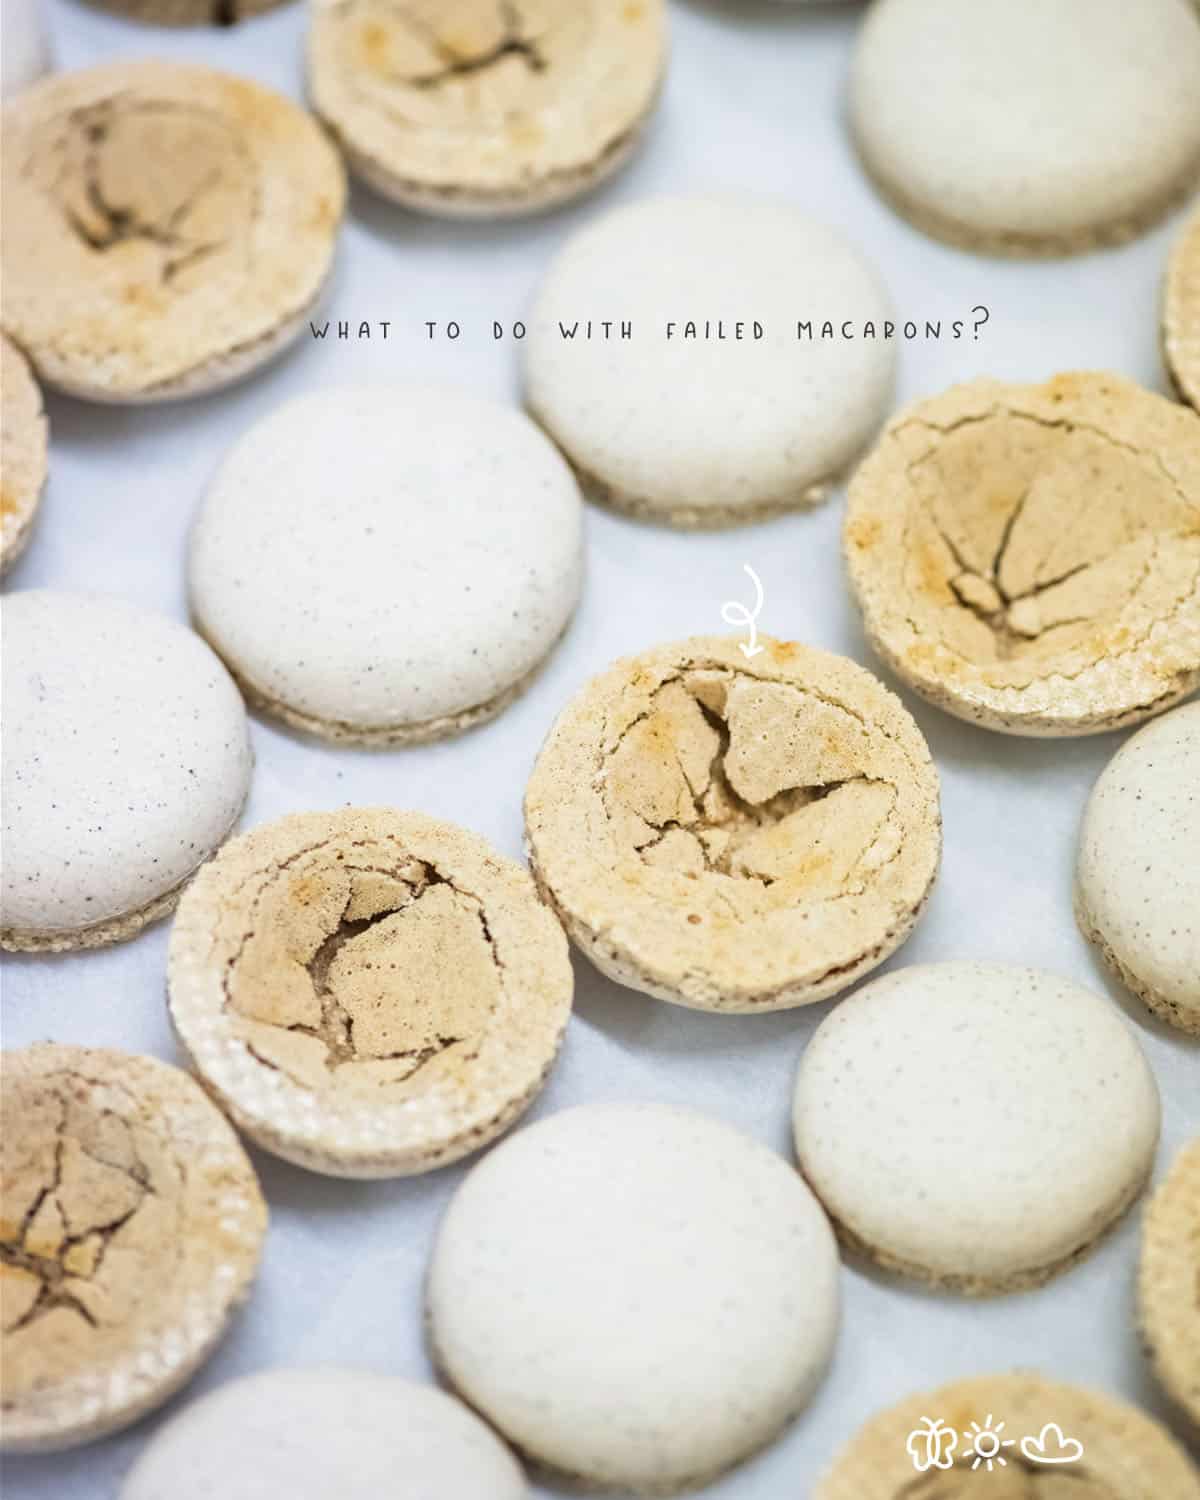 As every pastry chef knows, macarons can be a bit finicky. Sometimes they turn out perfect, and sometimes they don’t. If you’re unlucky enough to end up with a batch of failed macarons, don’t fret – here are some ideas for what to do with them.